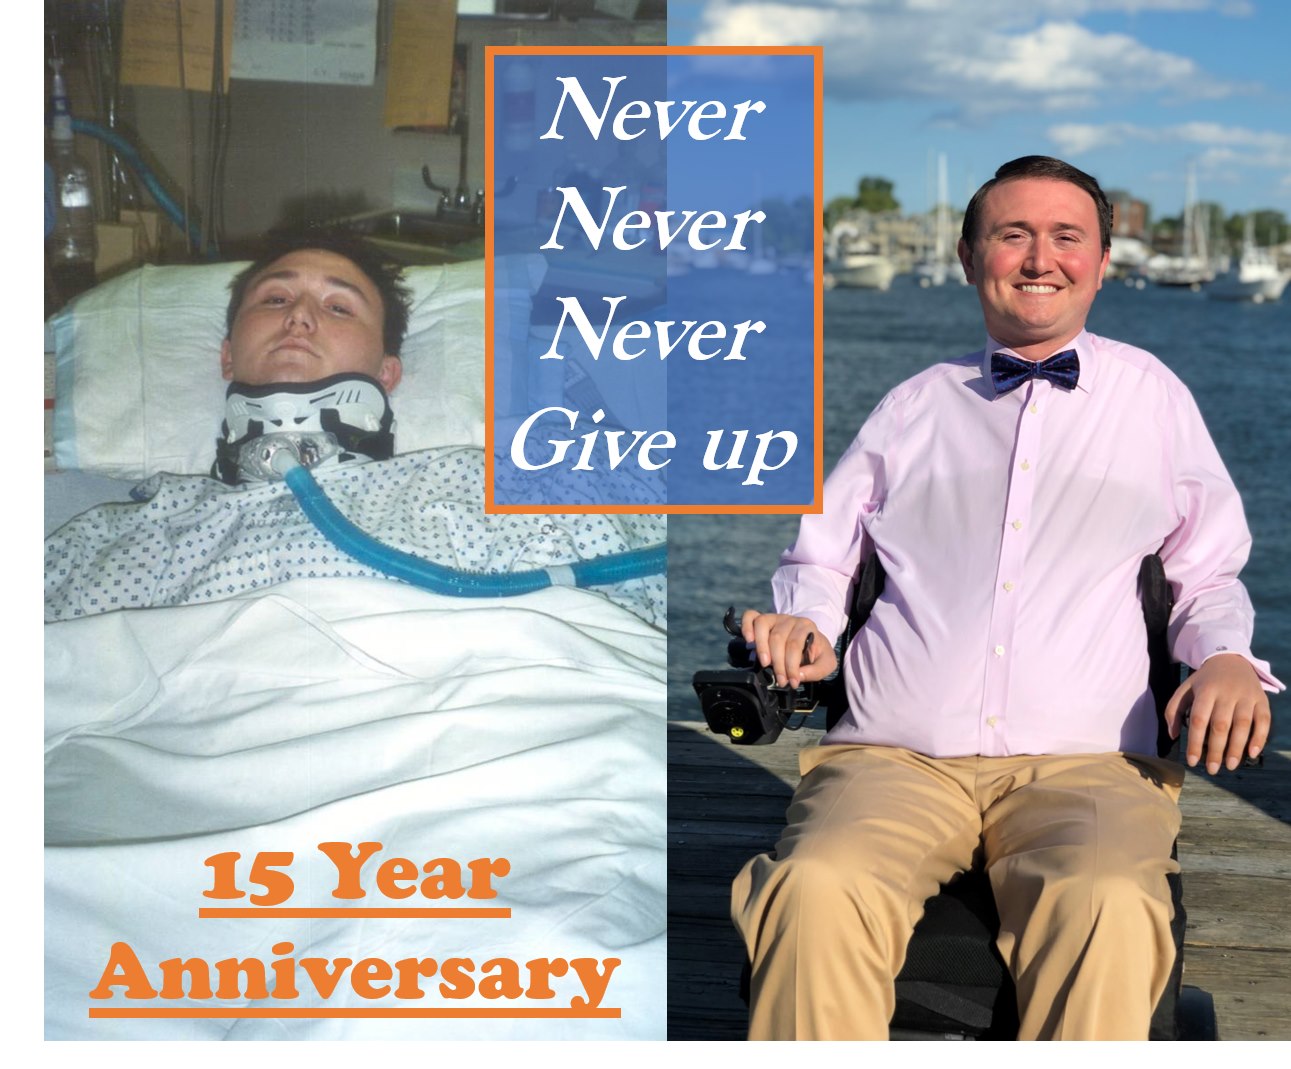 SPINALpedia Co-Founder Reflects on Injury Anniversary